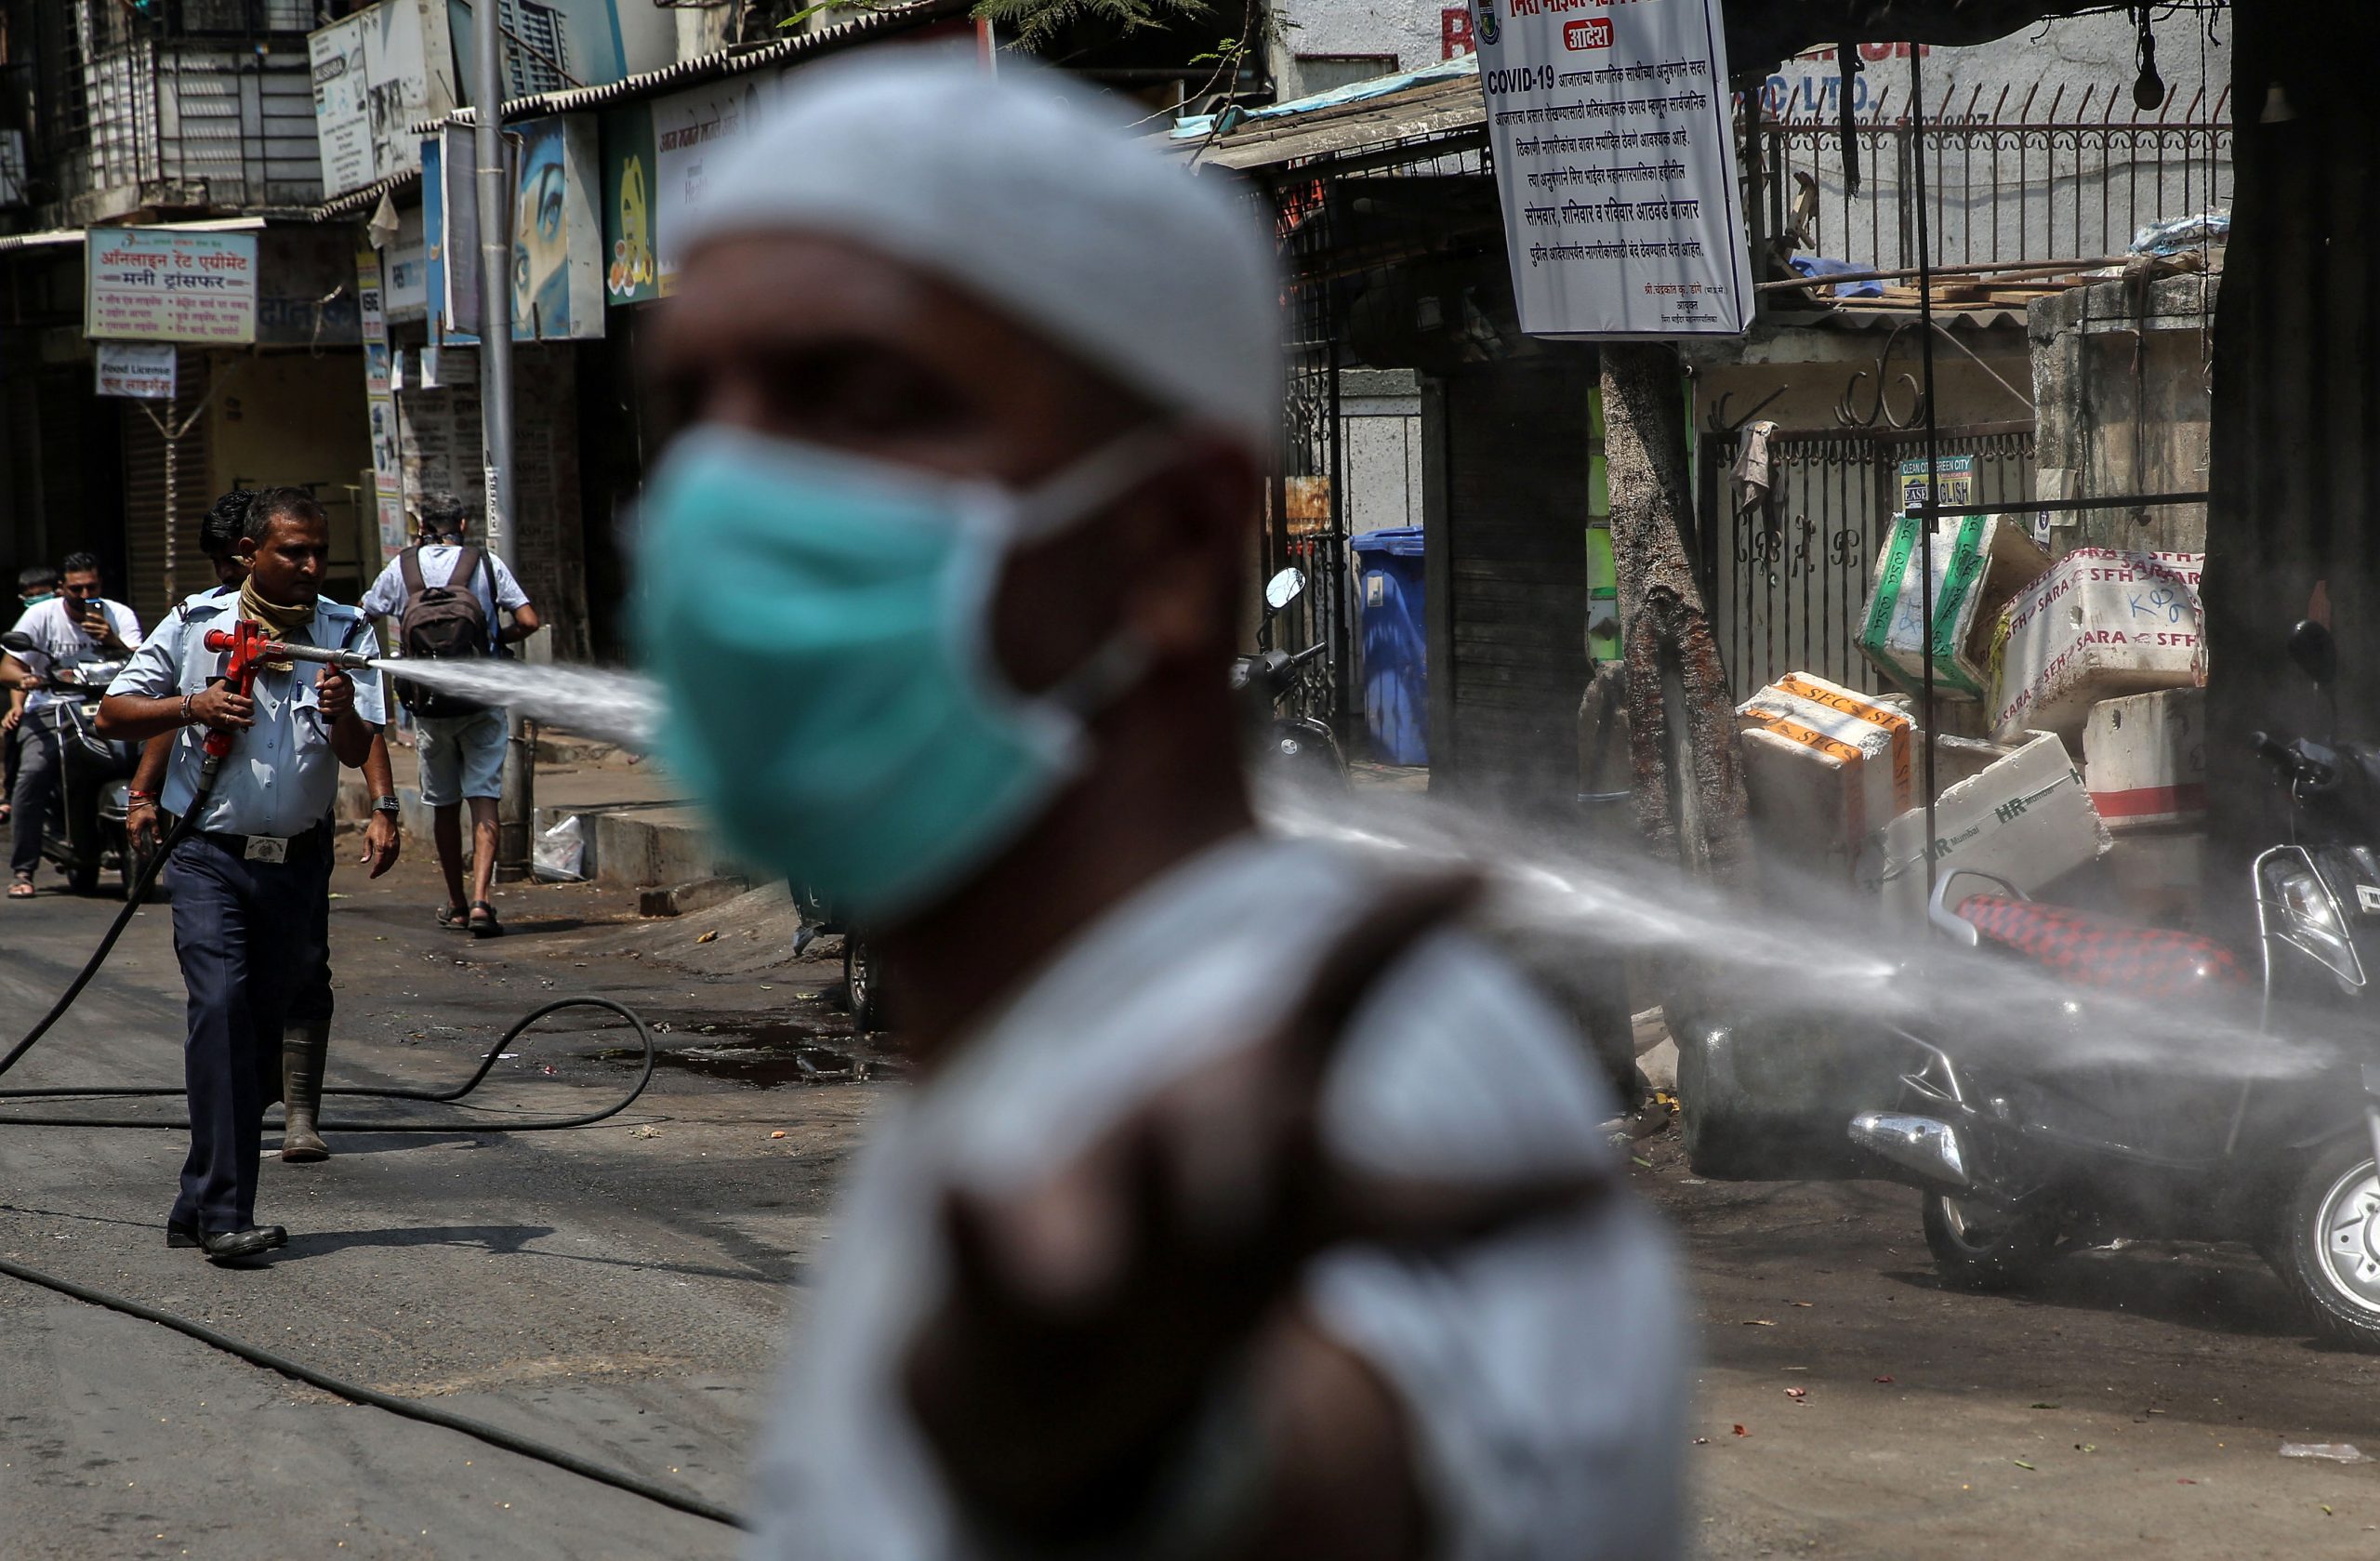 epa08323433 A man wearing a protective face mask walks in front of members of a municipal fire brigade as they spray disinfectant in a street  ofthe Mira Road residential area during an official lockdown of the city in an effort to combat the widespread of the SARS-CoV-2 coronavirus which causes the Covid-19 disease, in Mumbai, India, 26 March 2020. The Maharashtra state has been put under a  lock down until 31 March 2020 because of the Covid-19 coronavirus alert.  EPA/DIVYAKANT SOLANKI